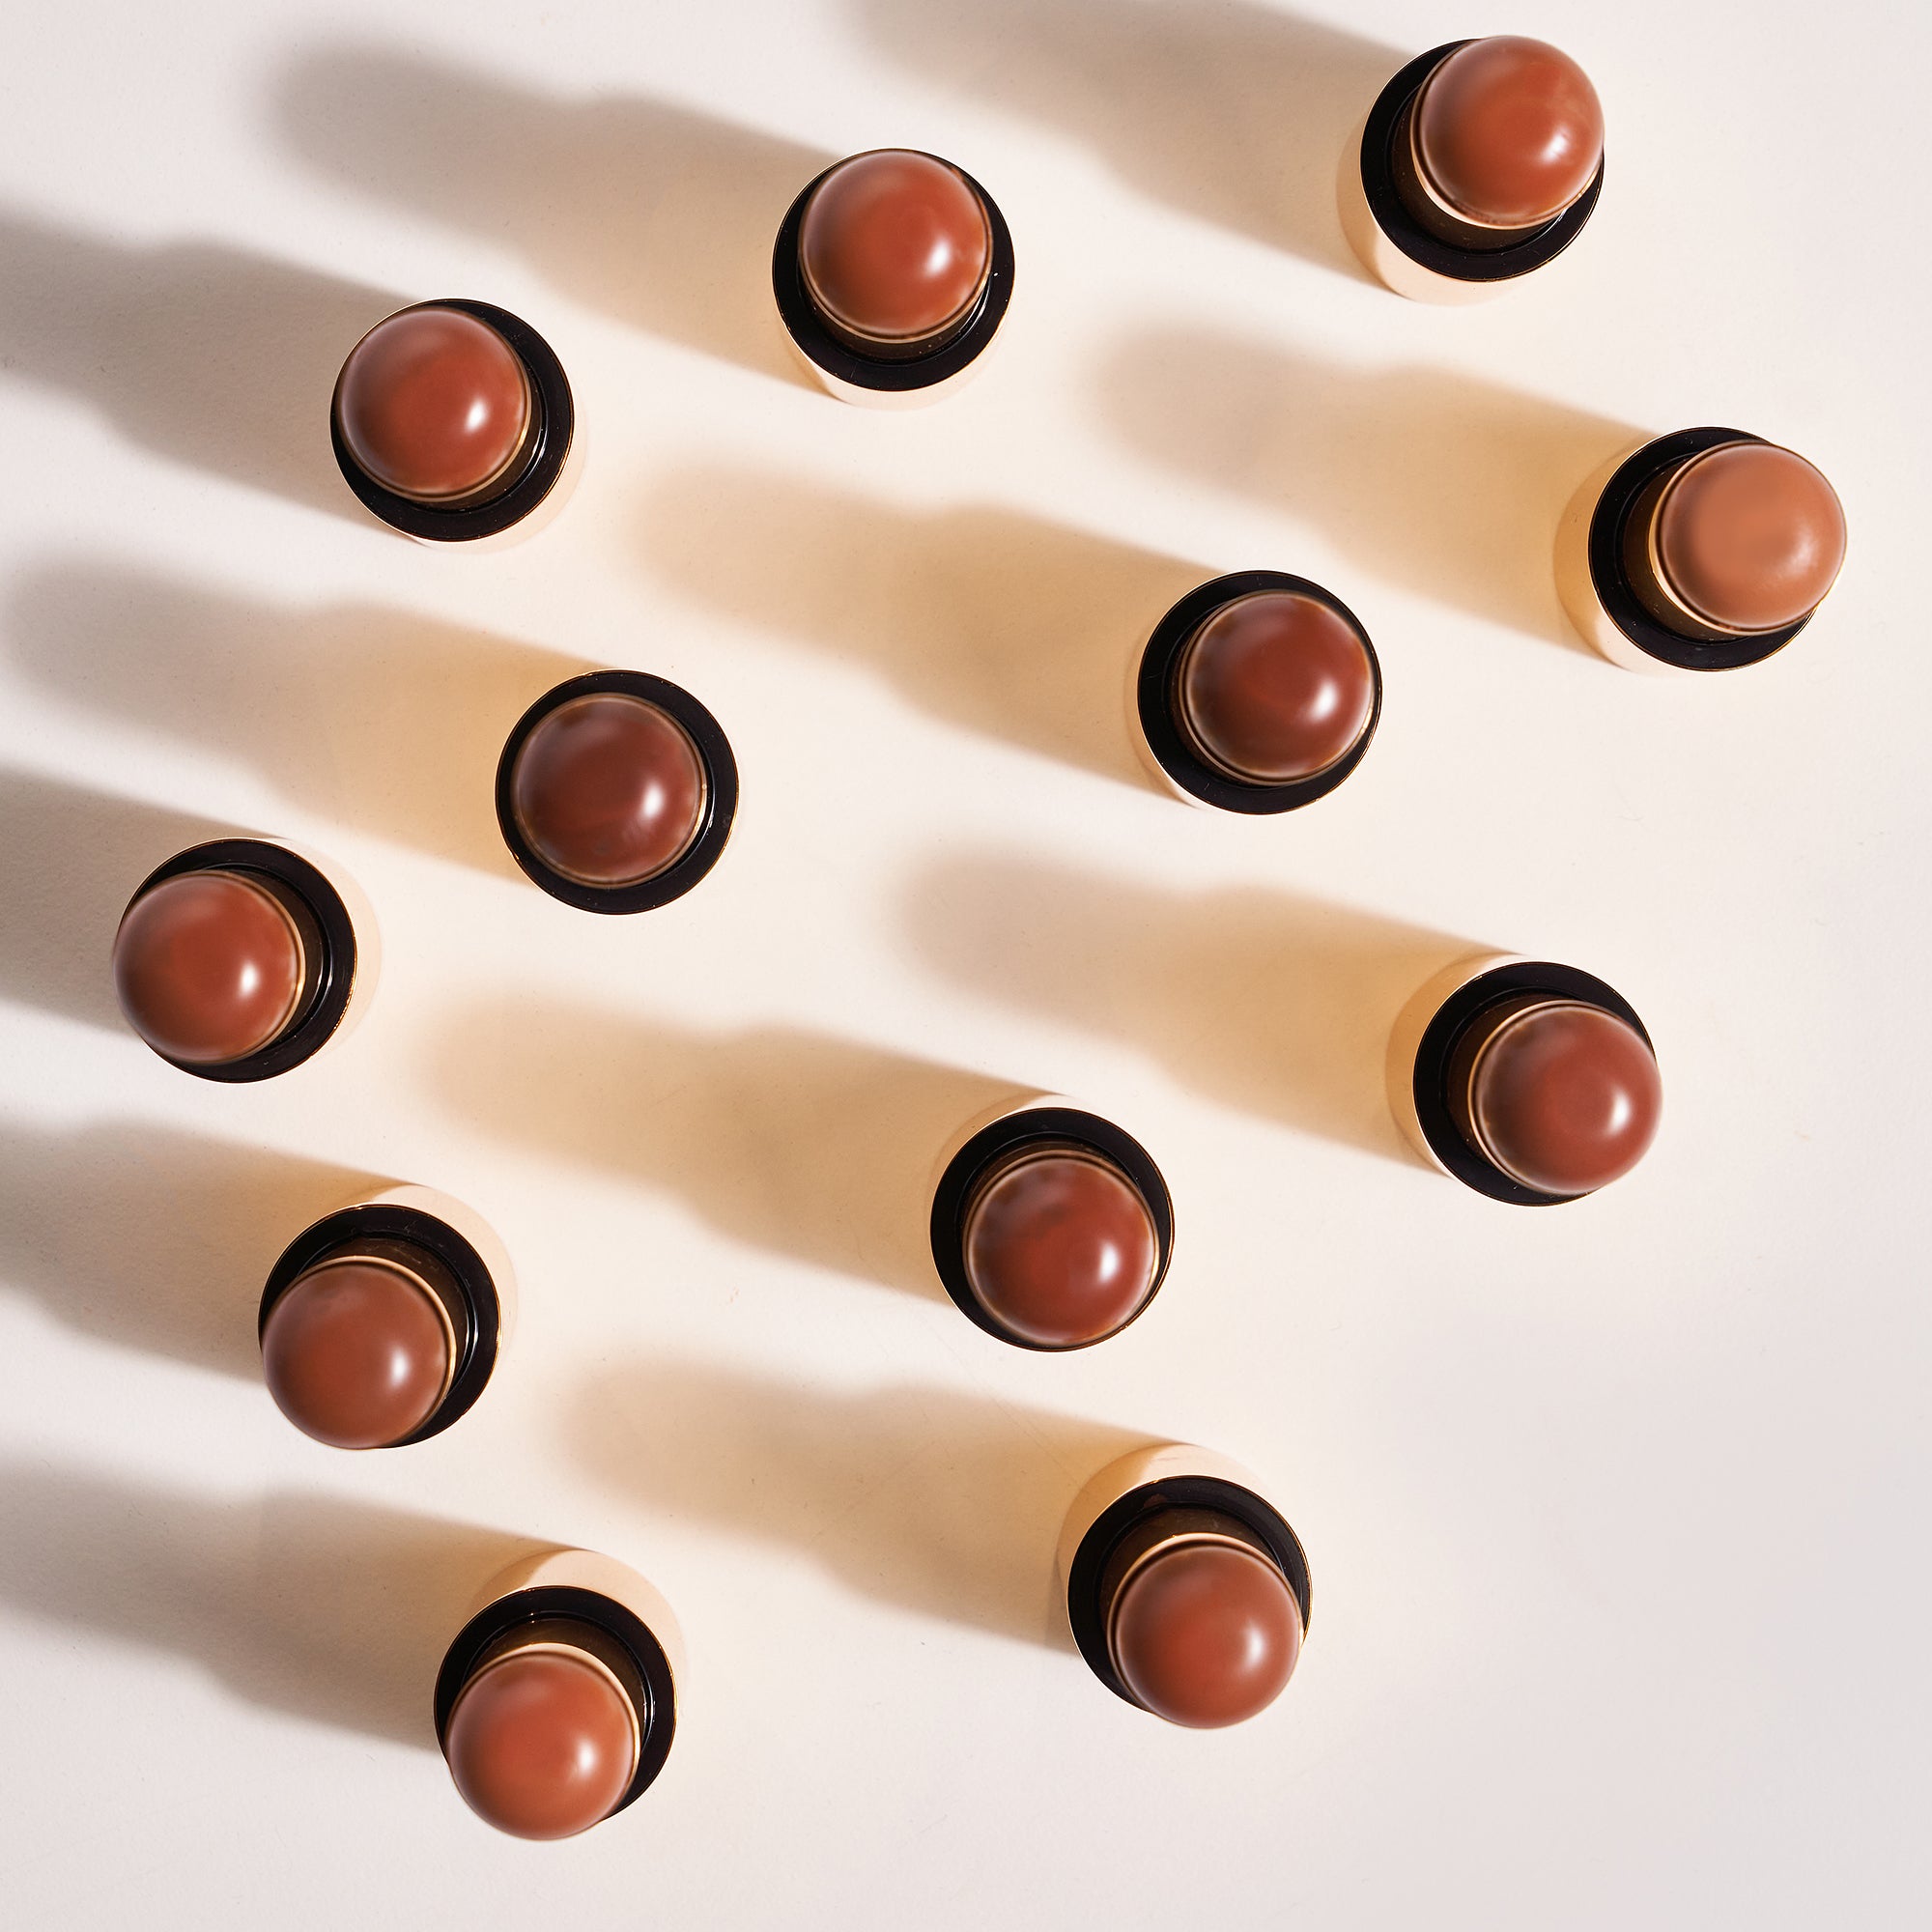 Rele-Wand™ 3-N-1 Foundation | Empower